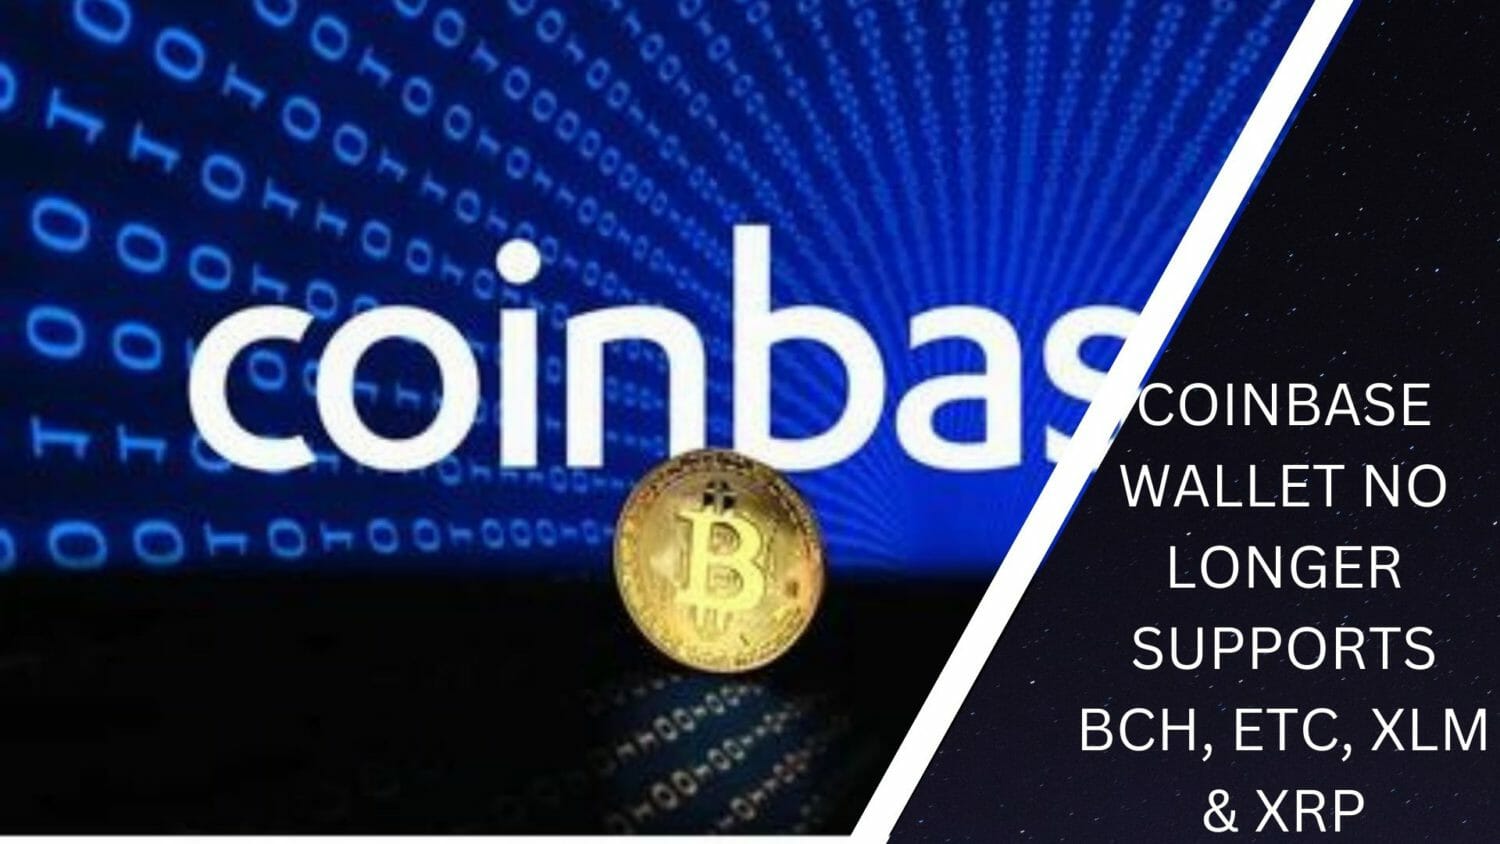 Coinbase wallet No Longer Supports BCH, ETC, XLM & XRP - CoinCodeCap